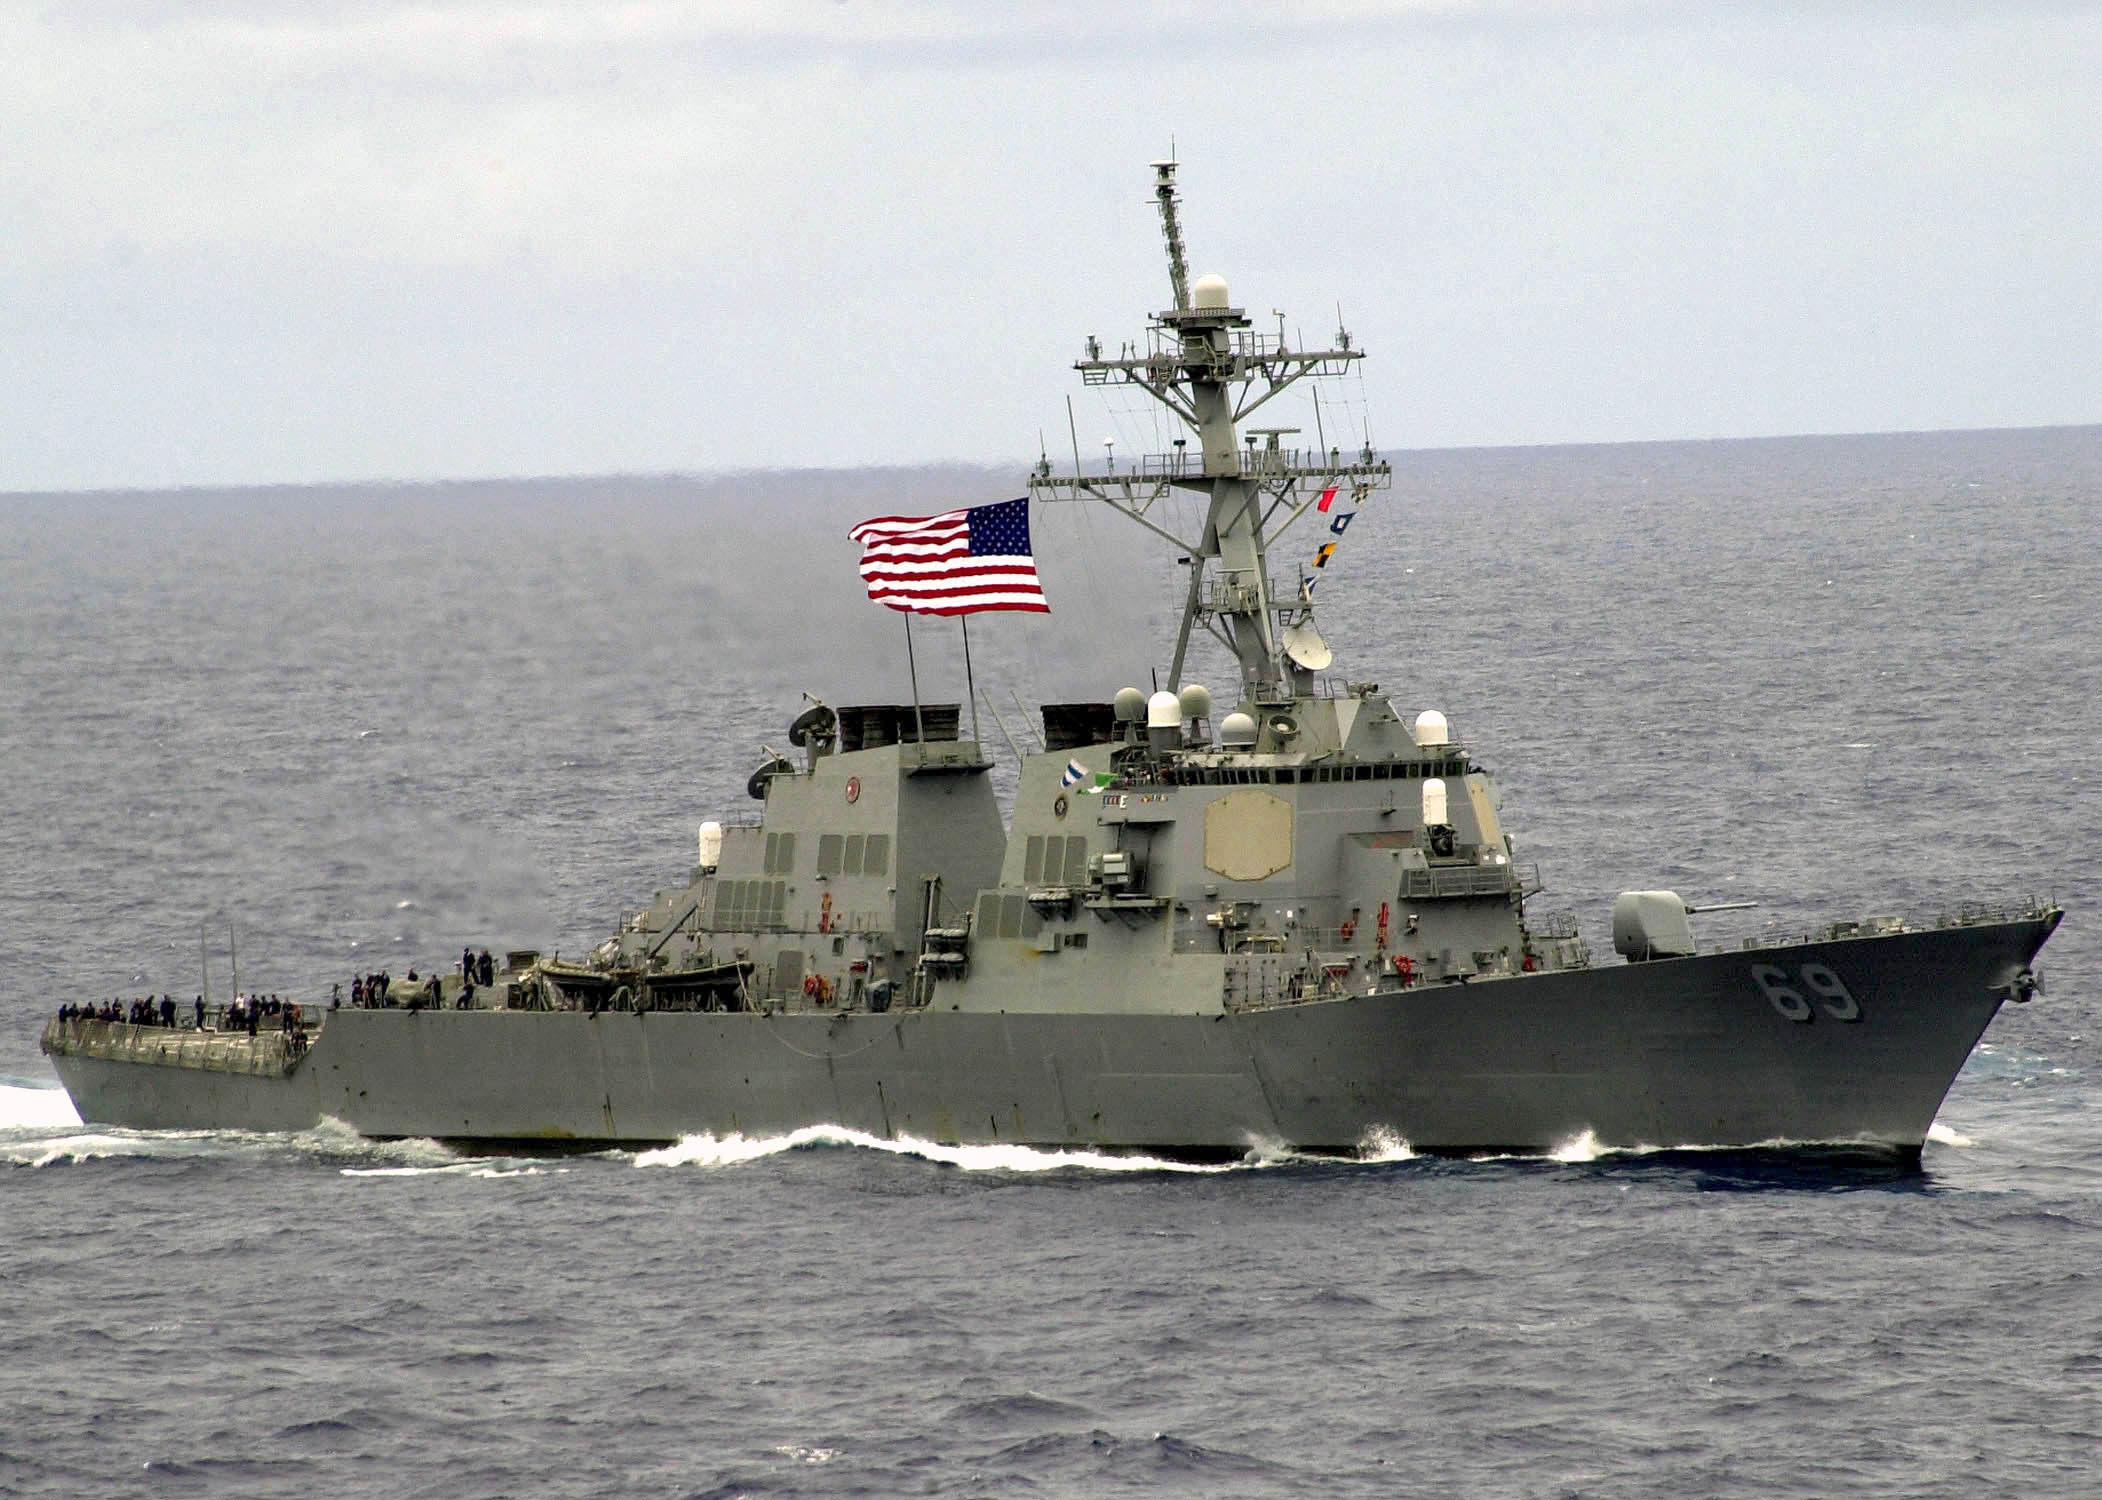 China, U.S. Navy in row over guided-missile destroyer in South China Sea